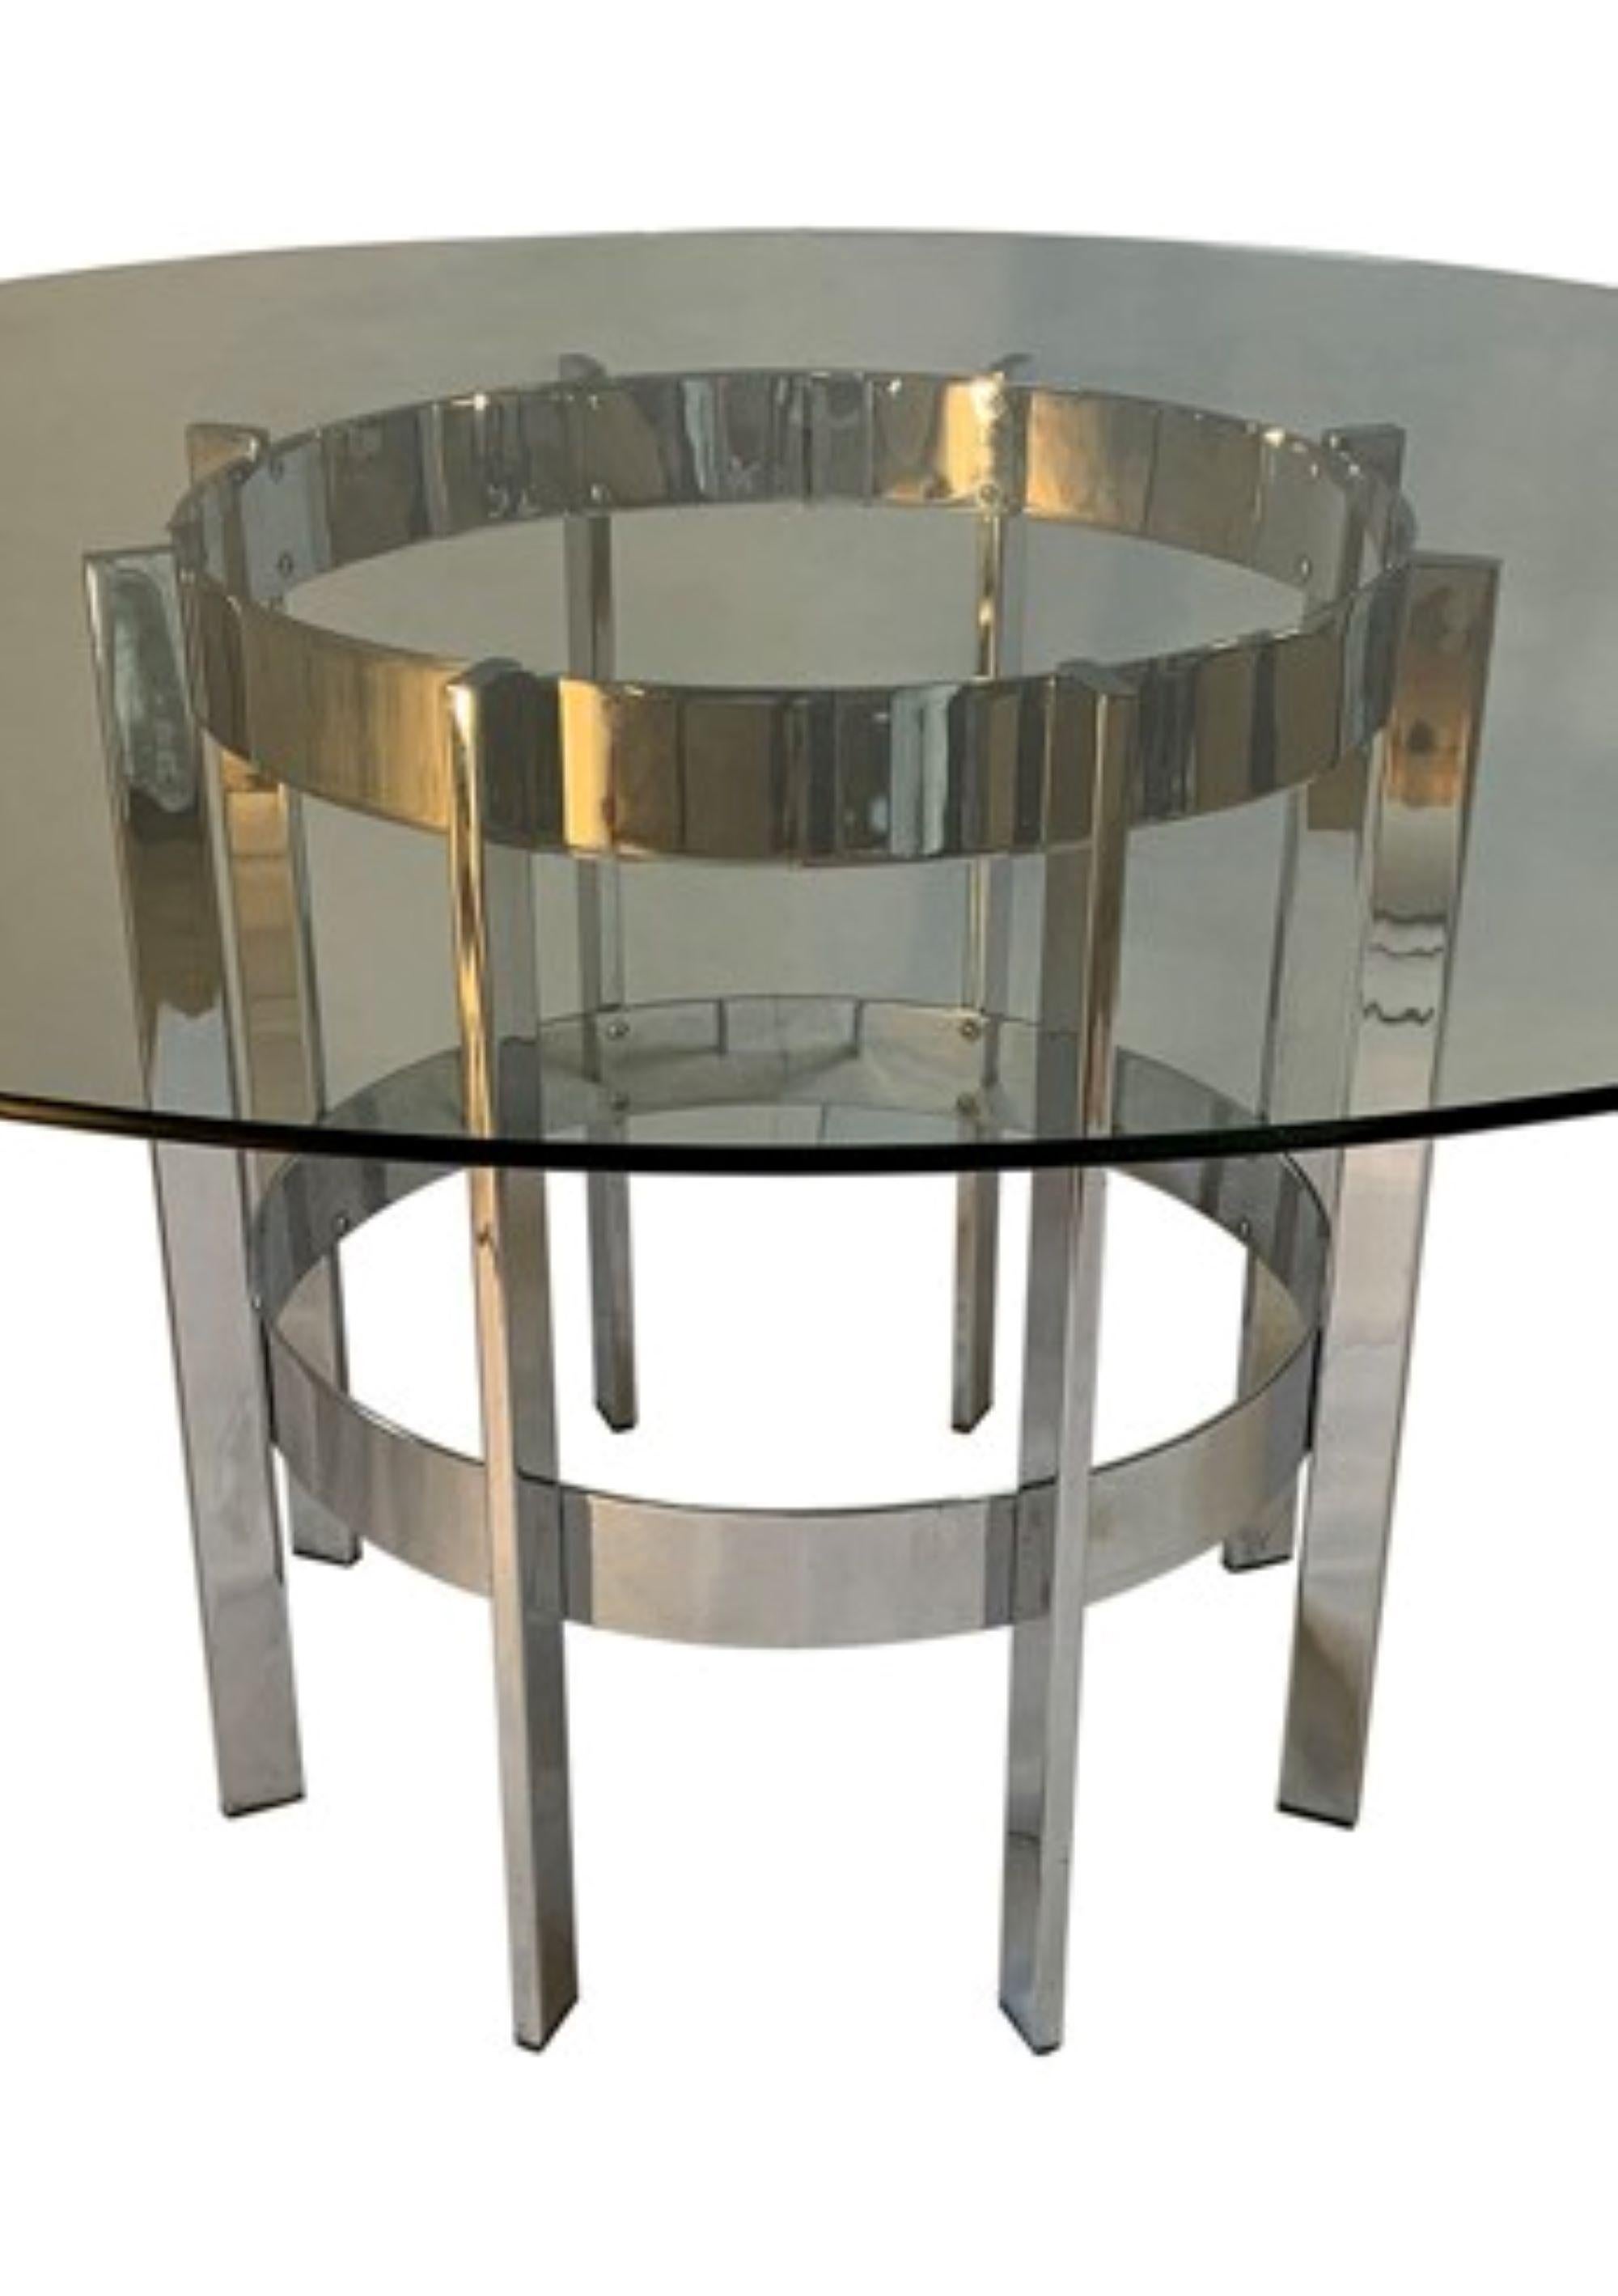 Associates dining table, named 'The Preece'. 

Large Circular clear toughened glass top dining with chrome base, designed by Richard Young in the late 1970s. 
Merrow Associates was started by Richard Young, who is a former Royal College of Art